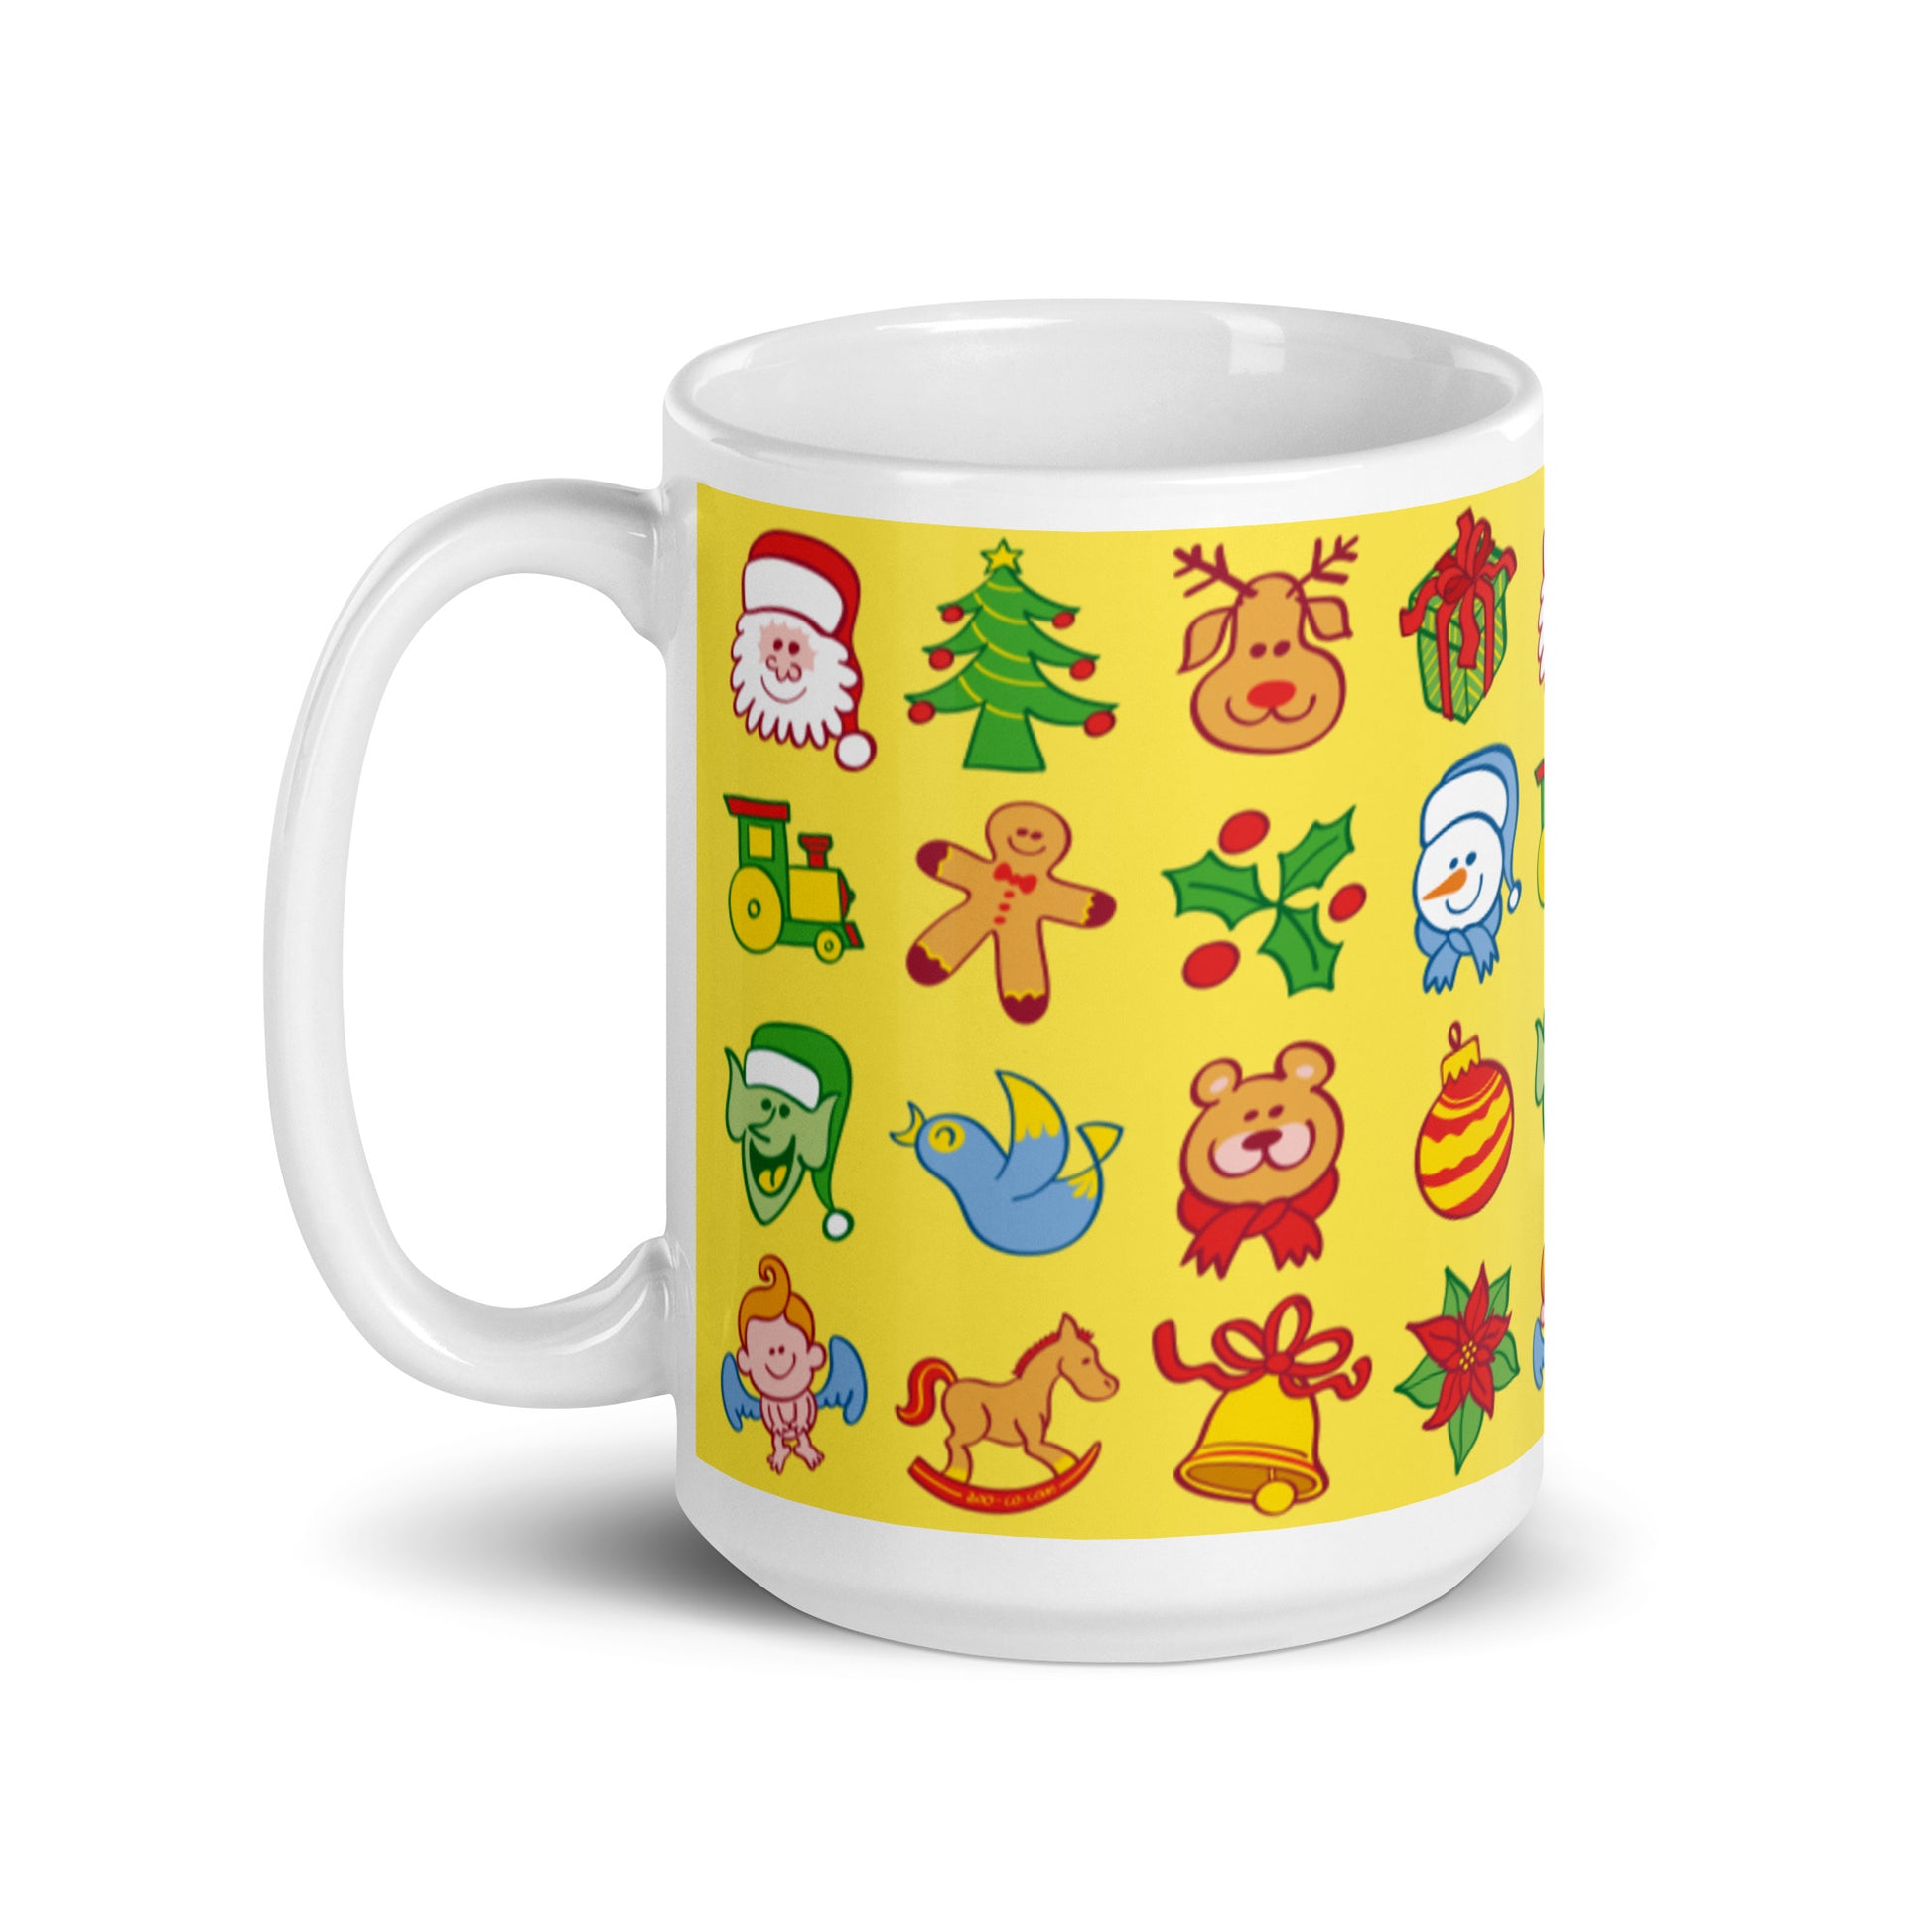 All the Christmas characters in a pattern design White glossy mug. 15 oz. Handle on left